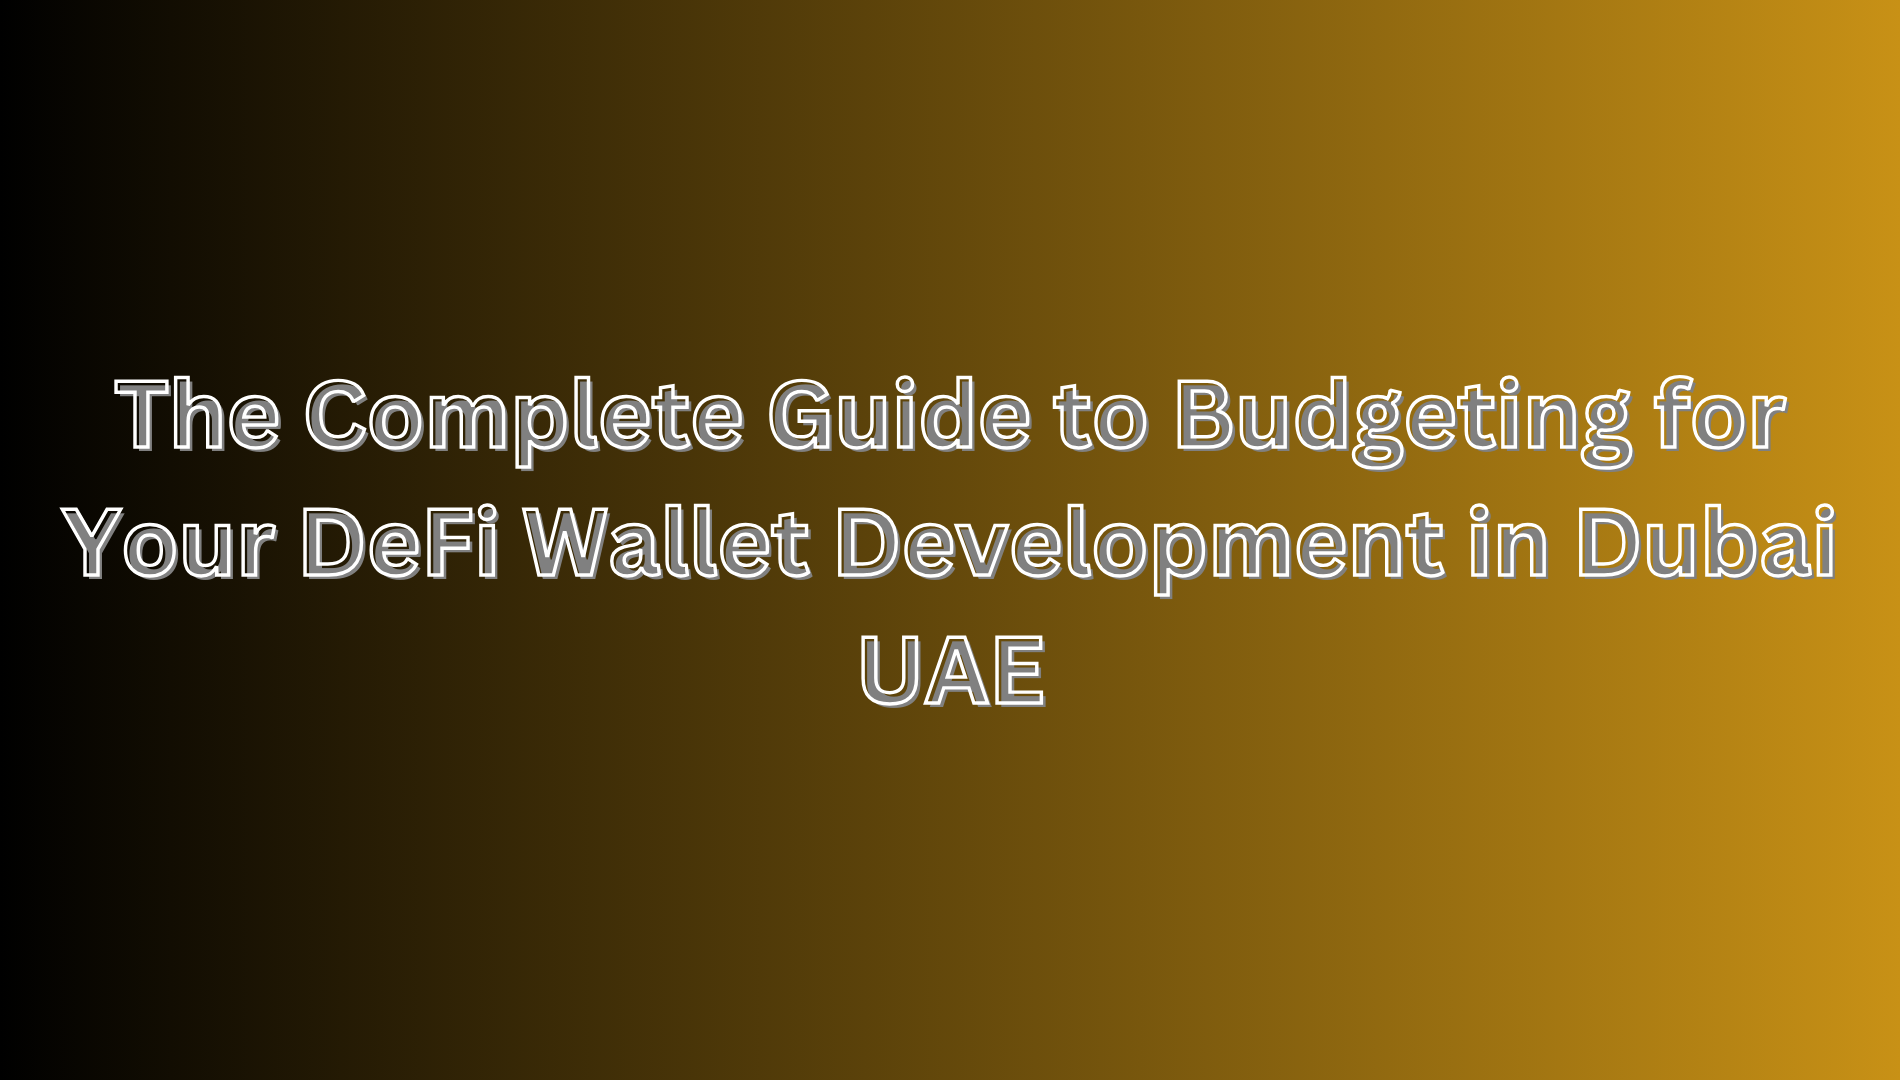 The Complete Guide to Budgeting for Your DeFi Wallet Development in Dubai UAE